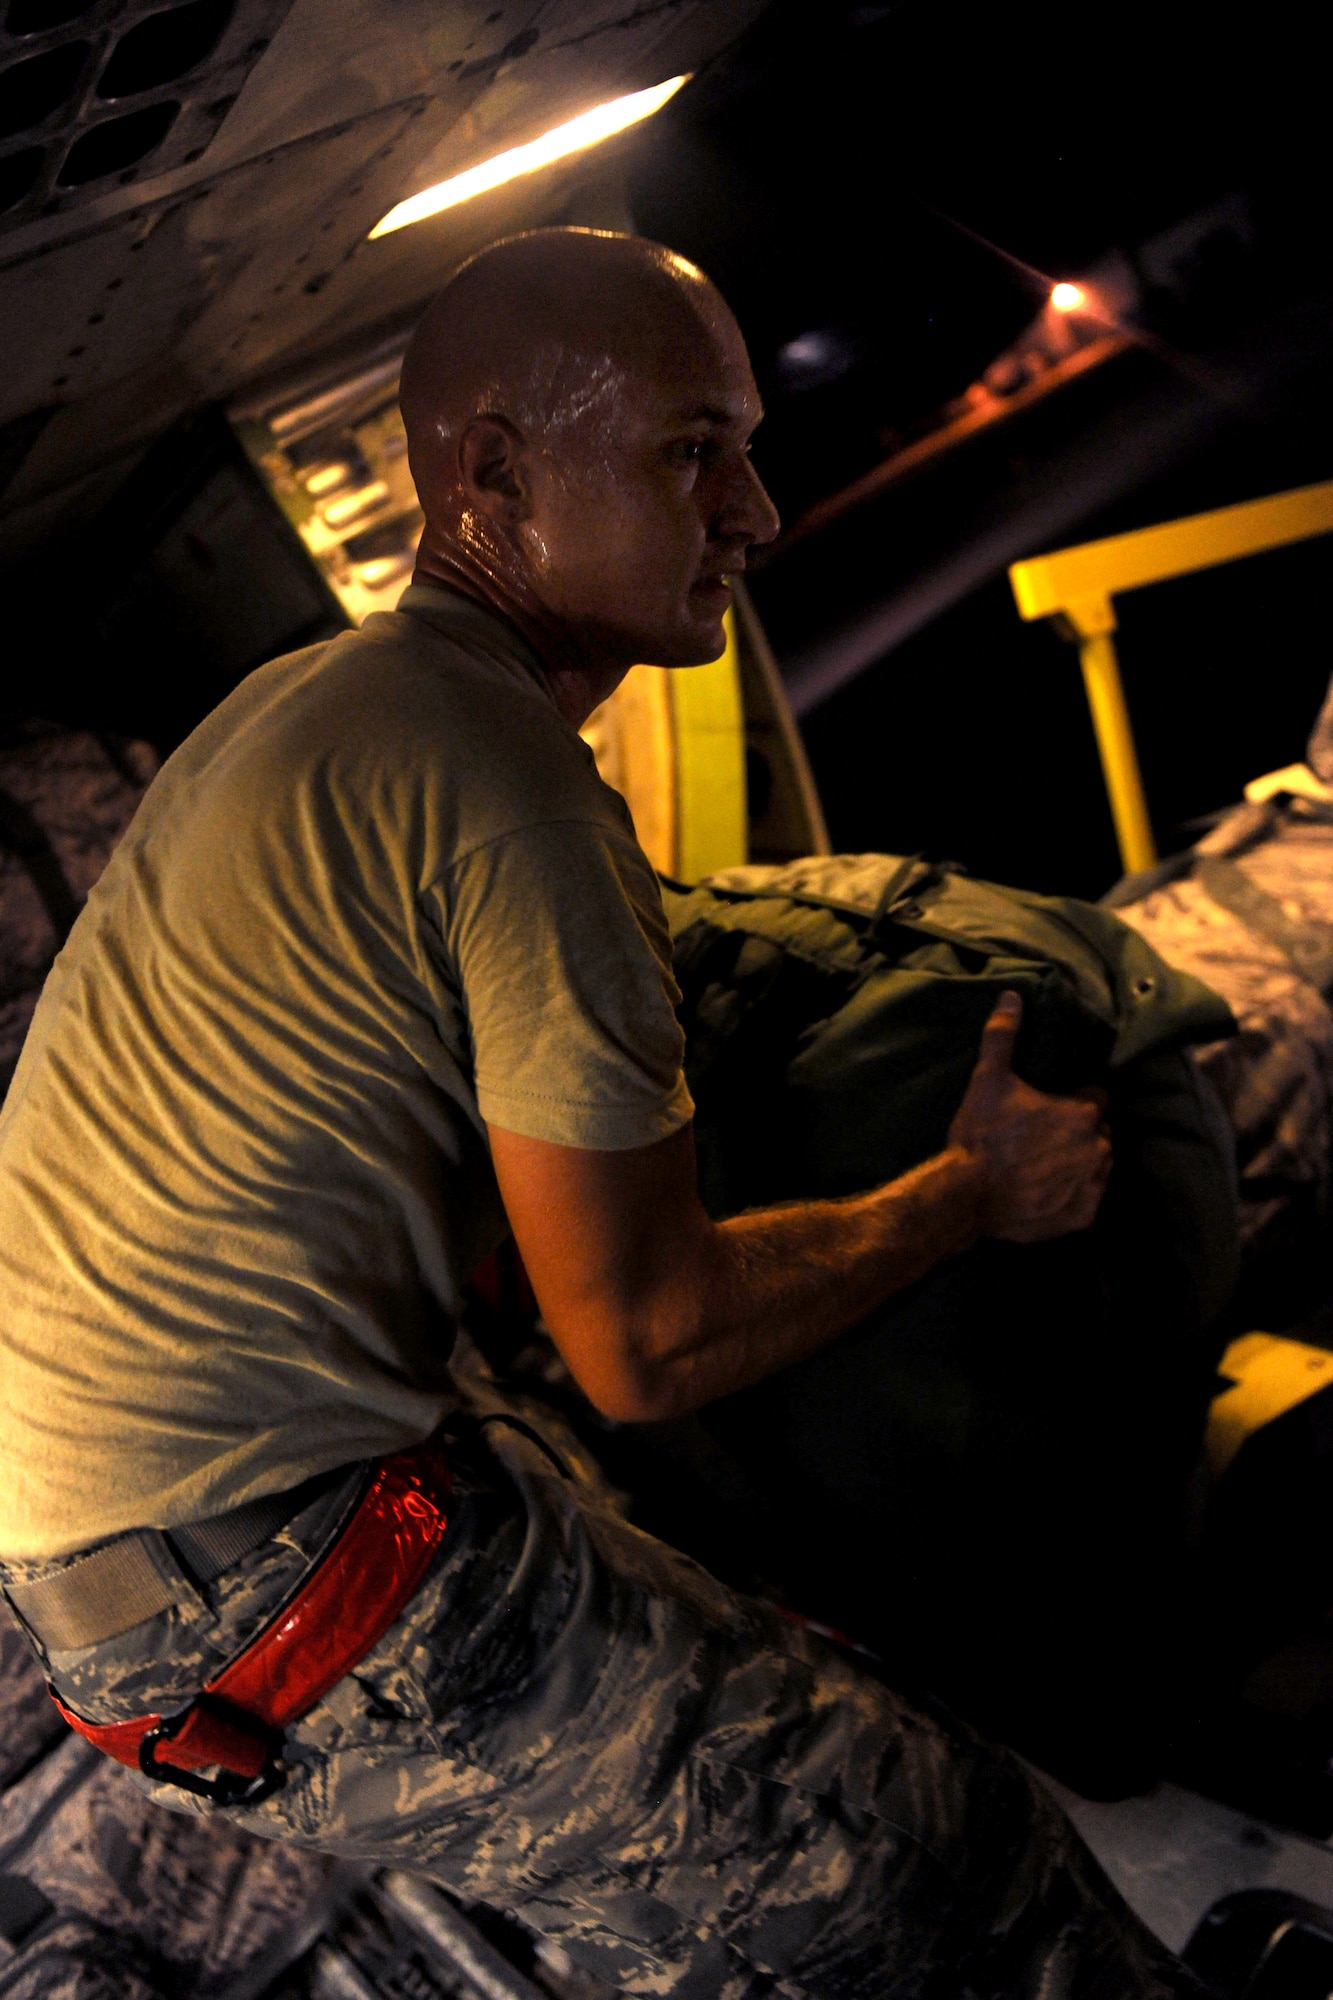 MOODY AIR FORCE BASE, Ga. -- Airman 1st Class Daniel Hugo, 23rd Aircraft Maintenance Squadron, loads baggage into a belly compartment of a commercial aircraft here. Bags were loaded for three straight hours to prepare for a deployment. (U.S. Air Force photo/Airman 1st Class Benjamin Wiseman)




